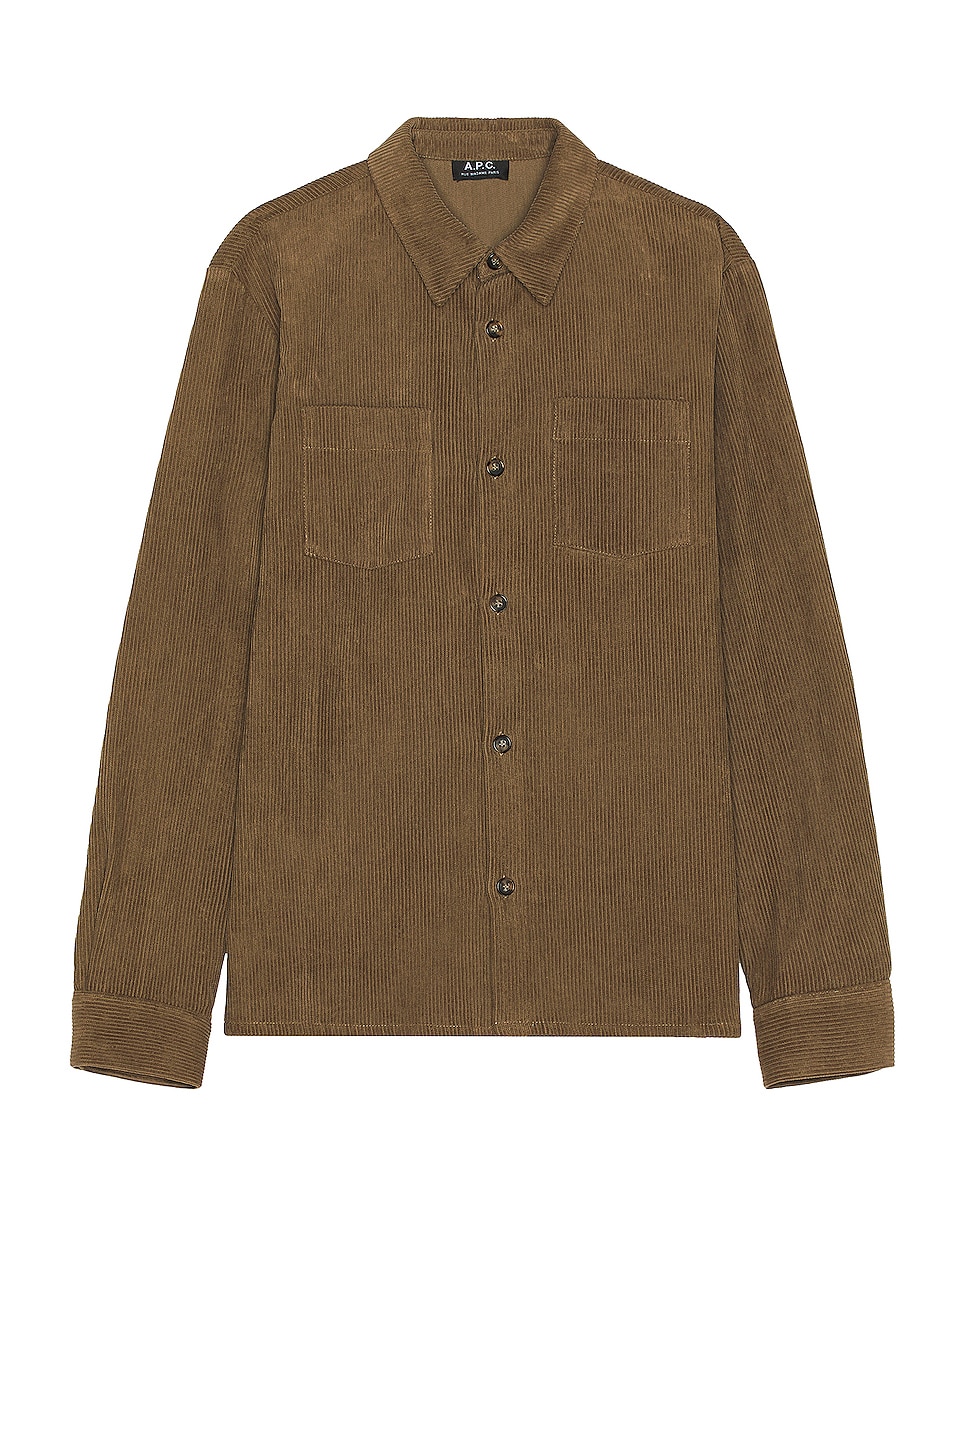 Image 1 of A.P.C. Joe Shirt in Taupe